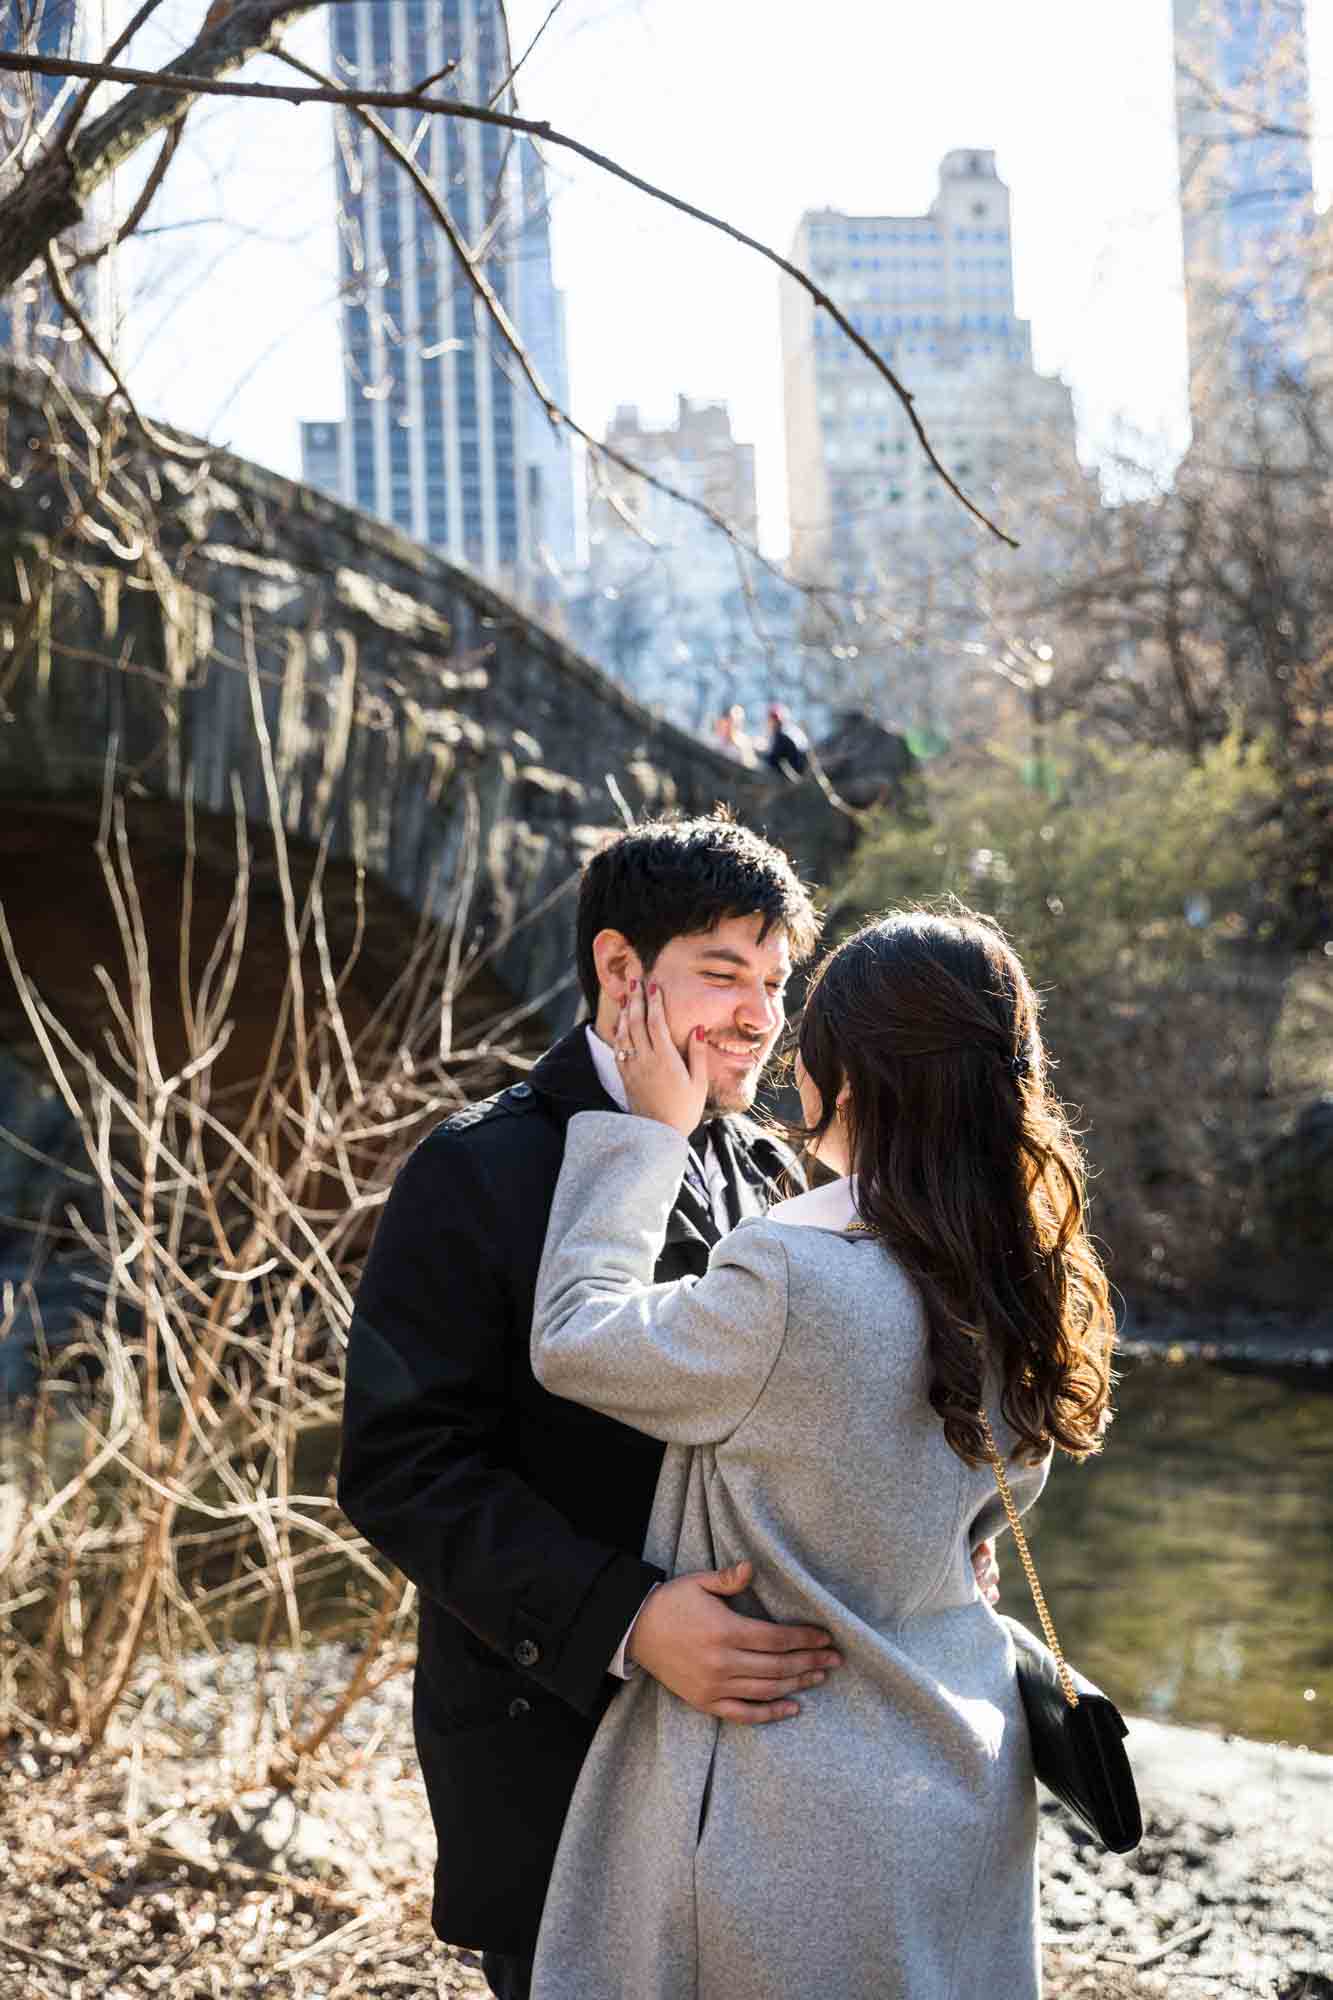 Woman with hand on man's cheek during a Gapstow Bridge surprise proposal in Central Park